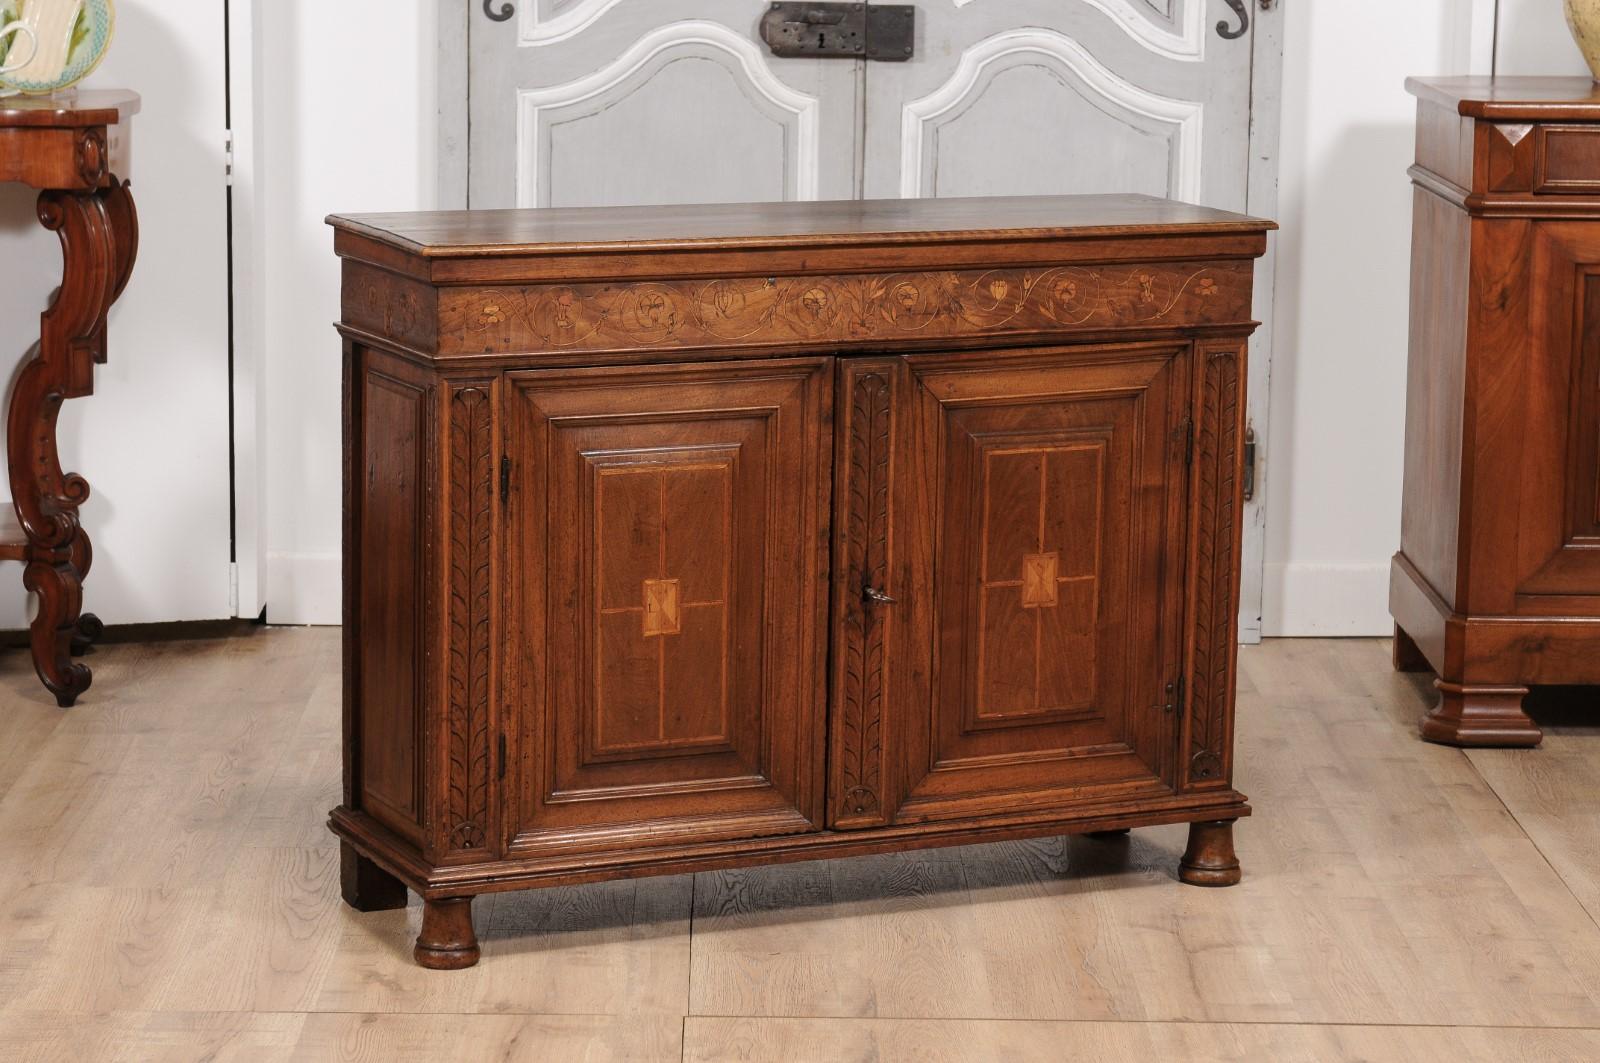 Italian 1620s Walnut Buffet with Floral Marquetry Scrollwork and Inlaid Doors In Good Condition For Sale In Atlanta, GA